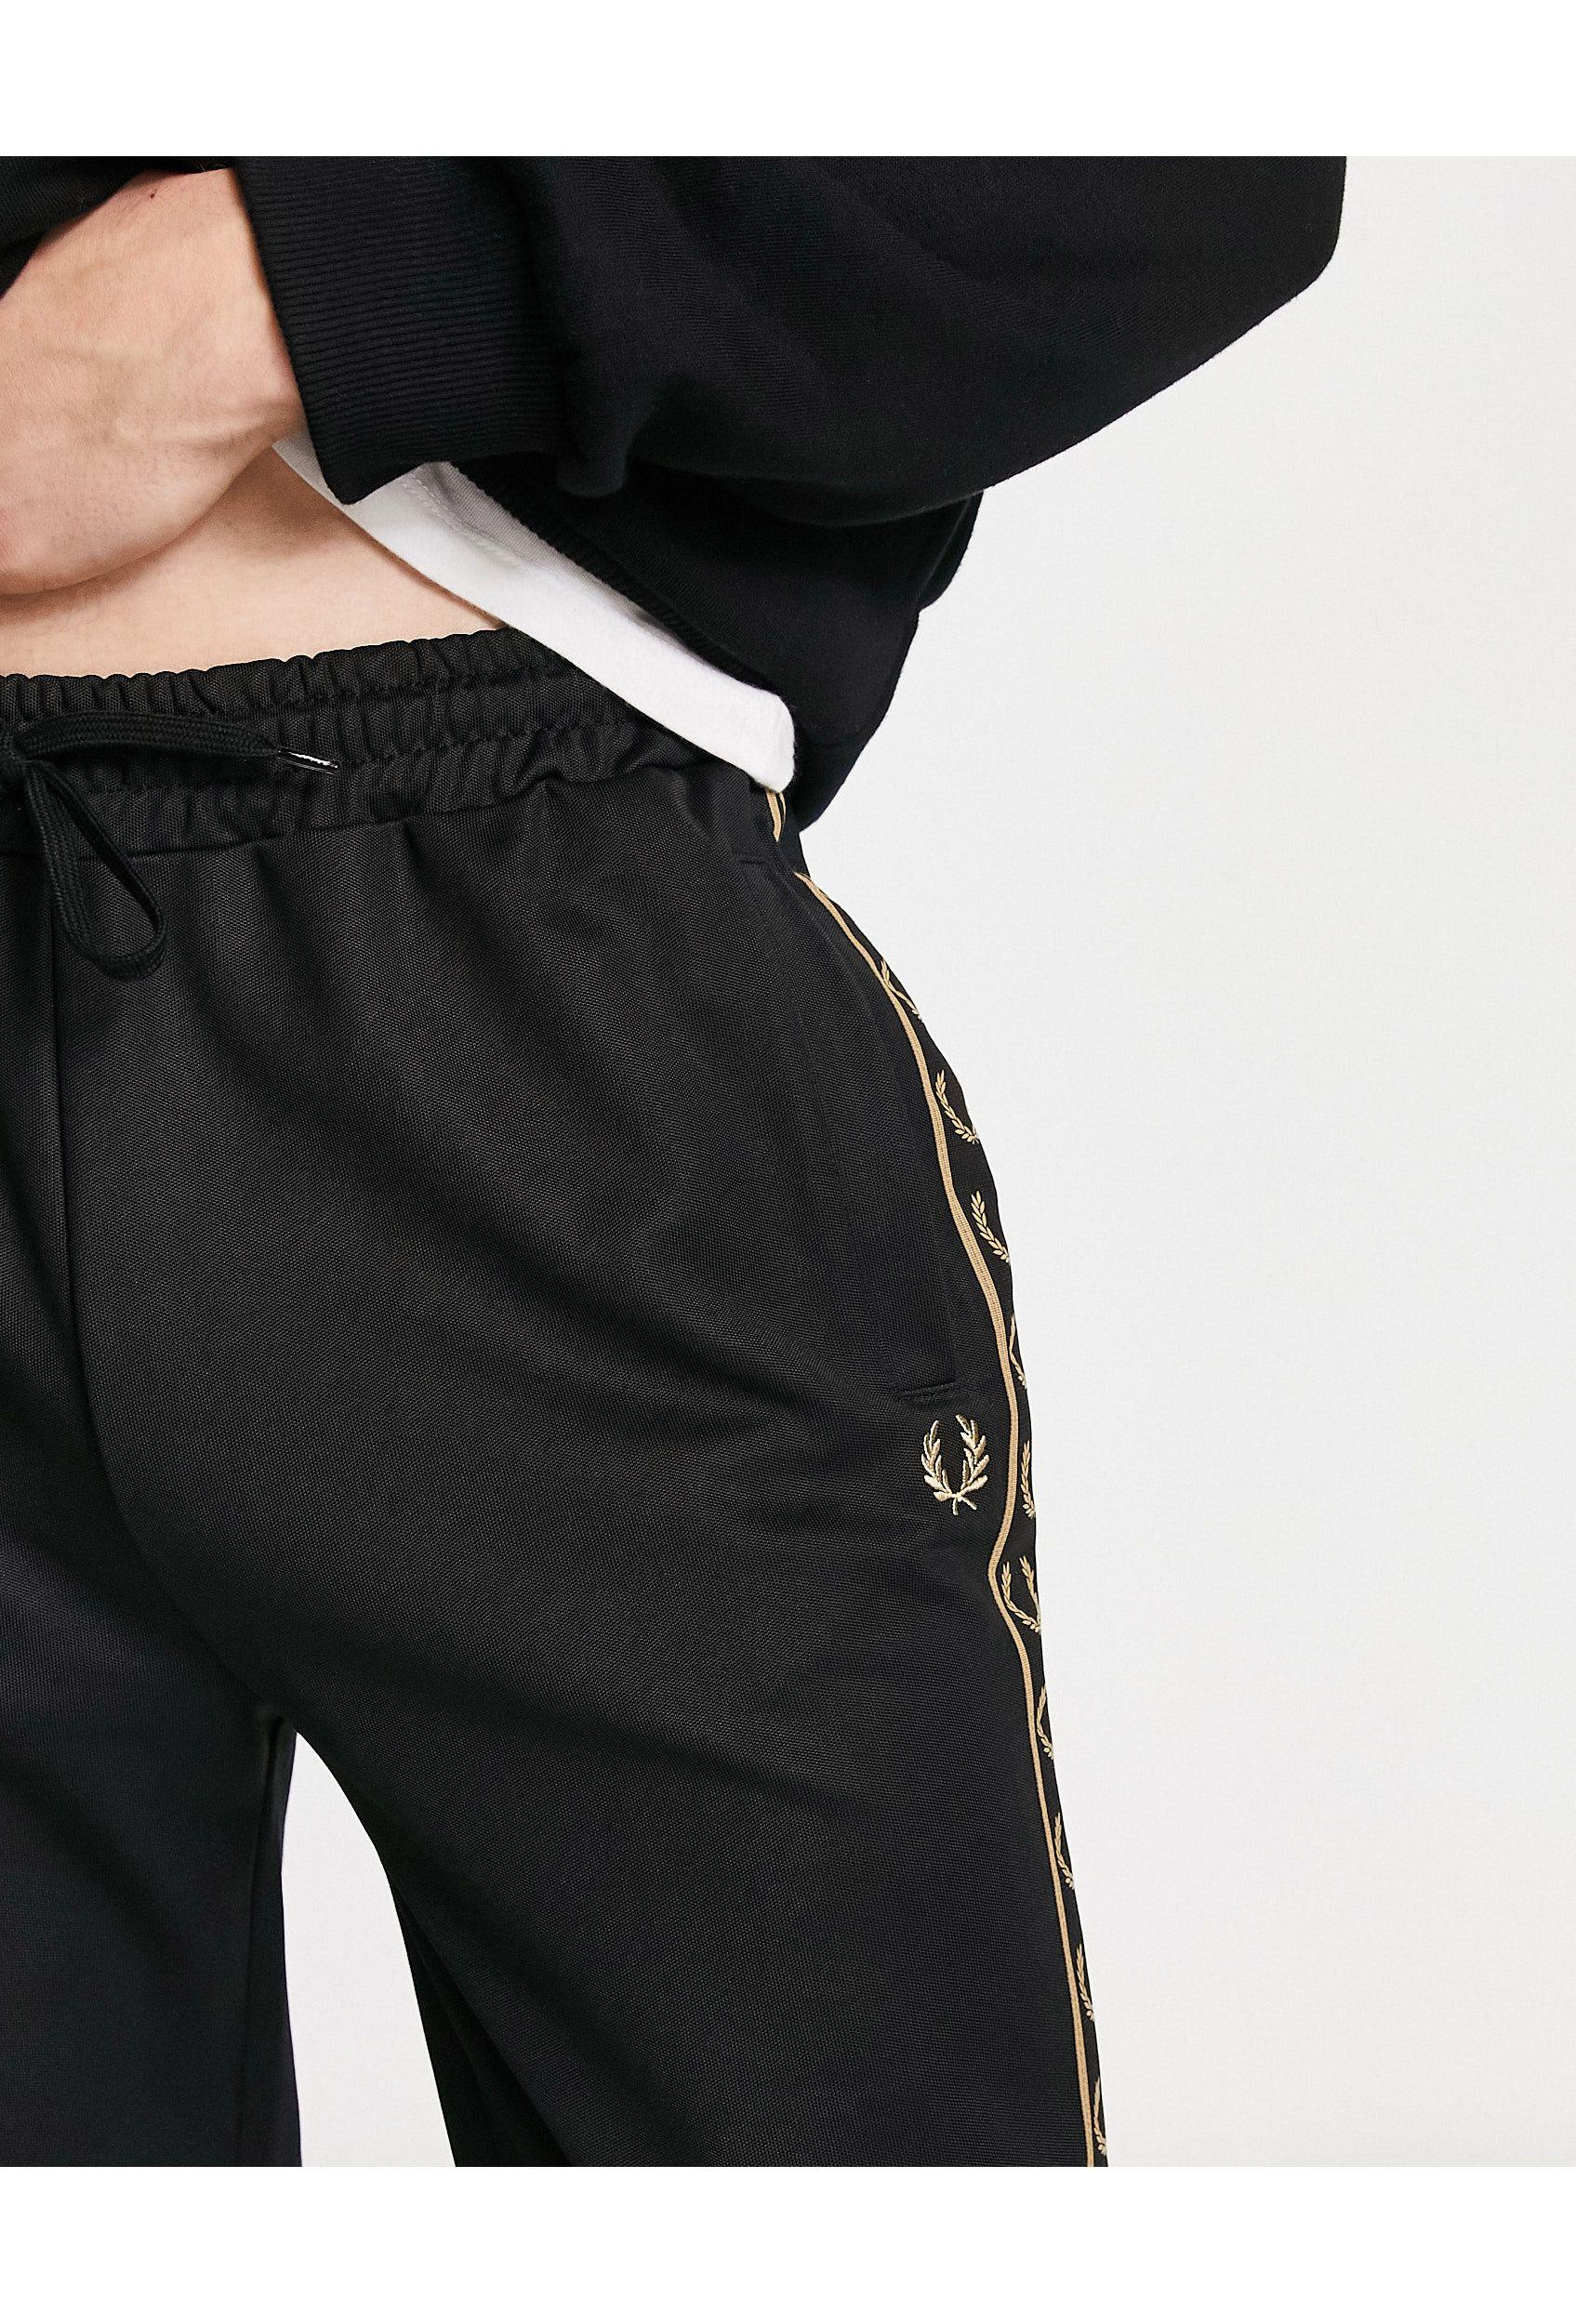 Fred Perry Taped Track Pants in Black for Men | Lyst